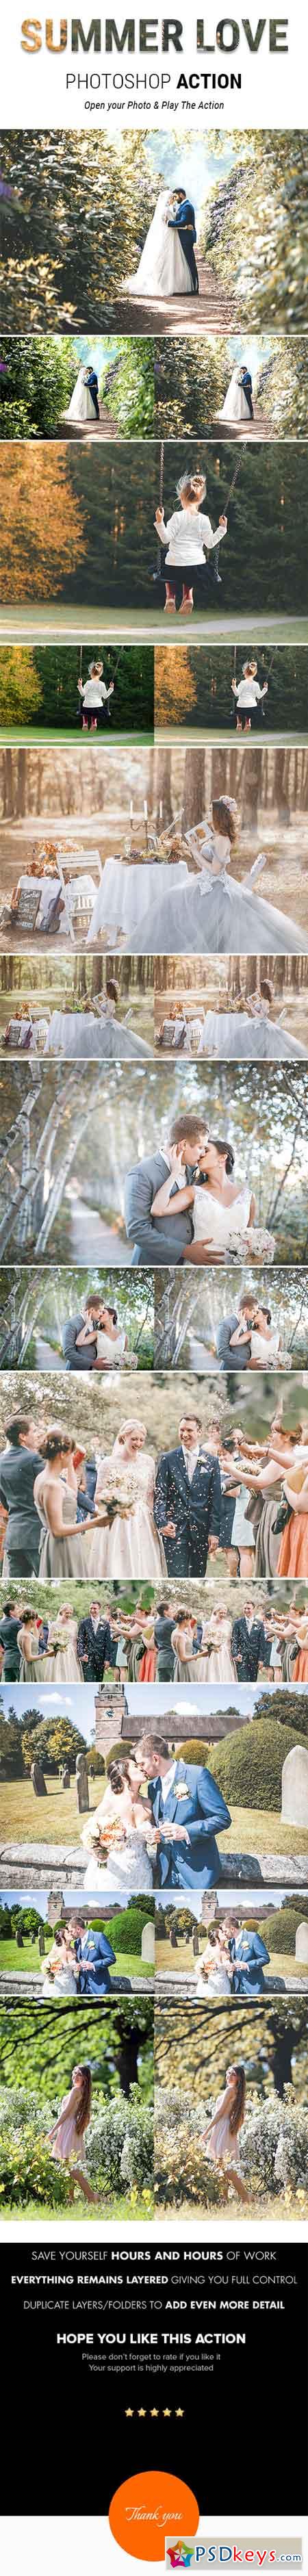 Summer Love - Romantic Summer Effects Photoshop Action for Wedding Photography 22041761